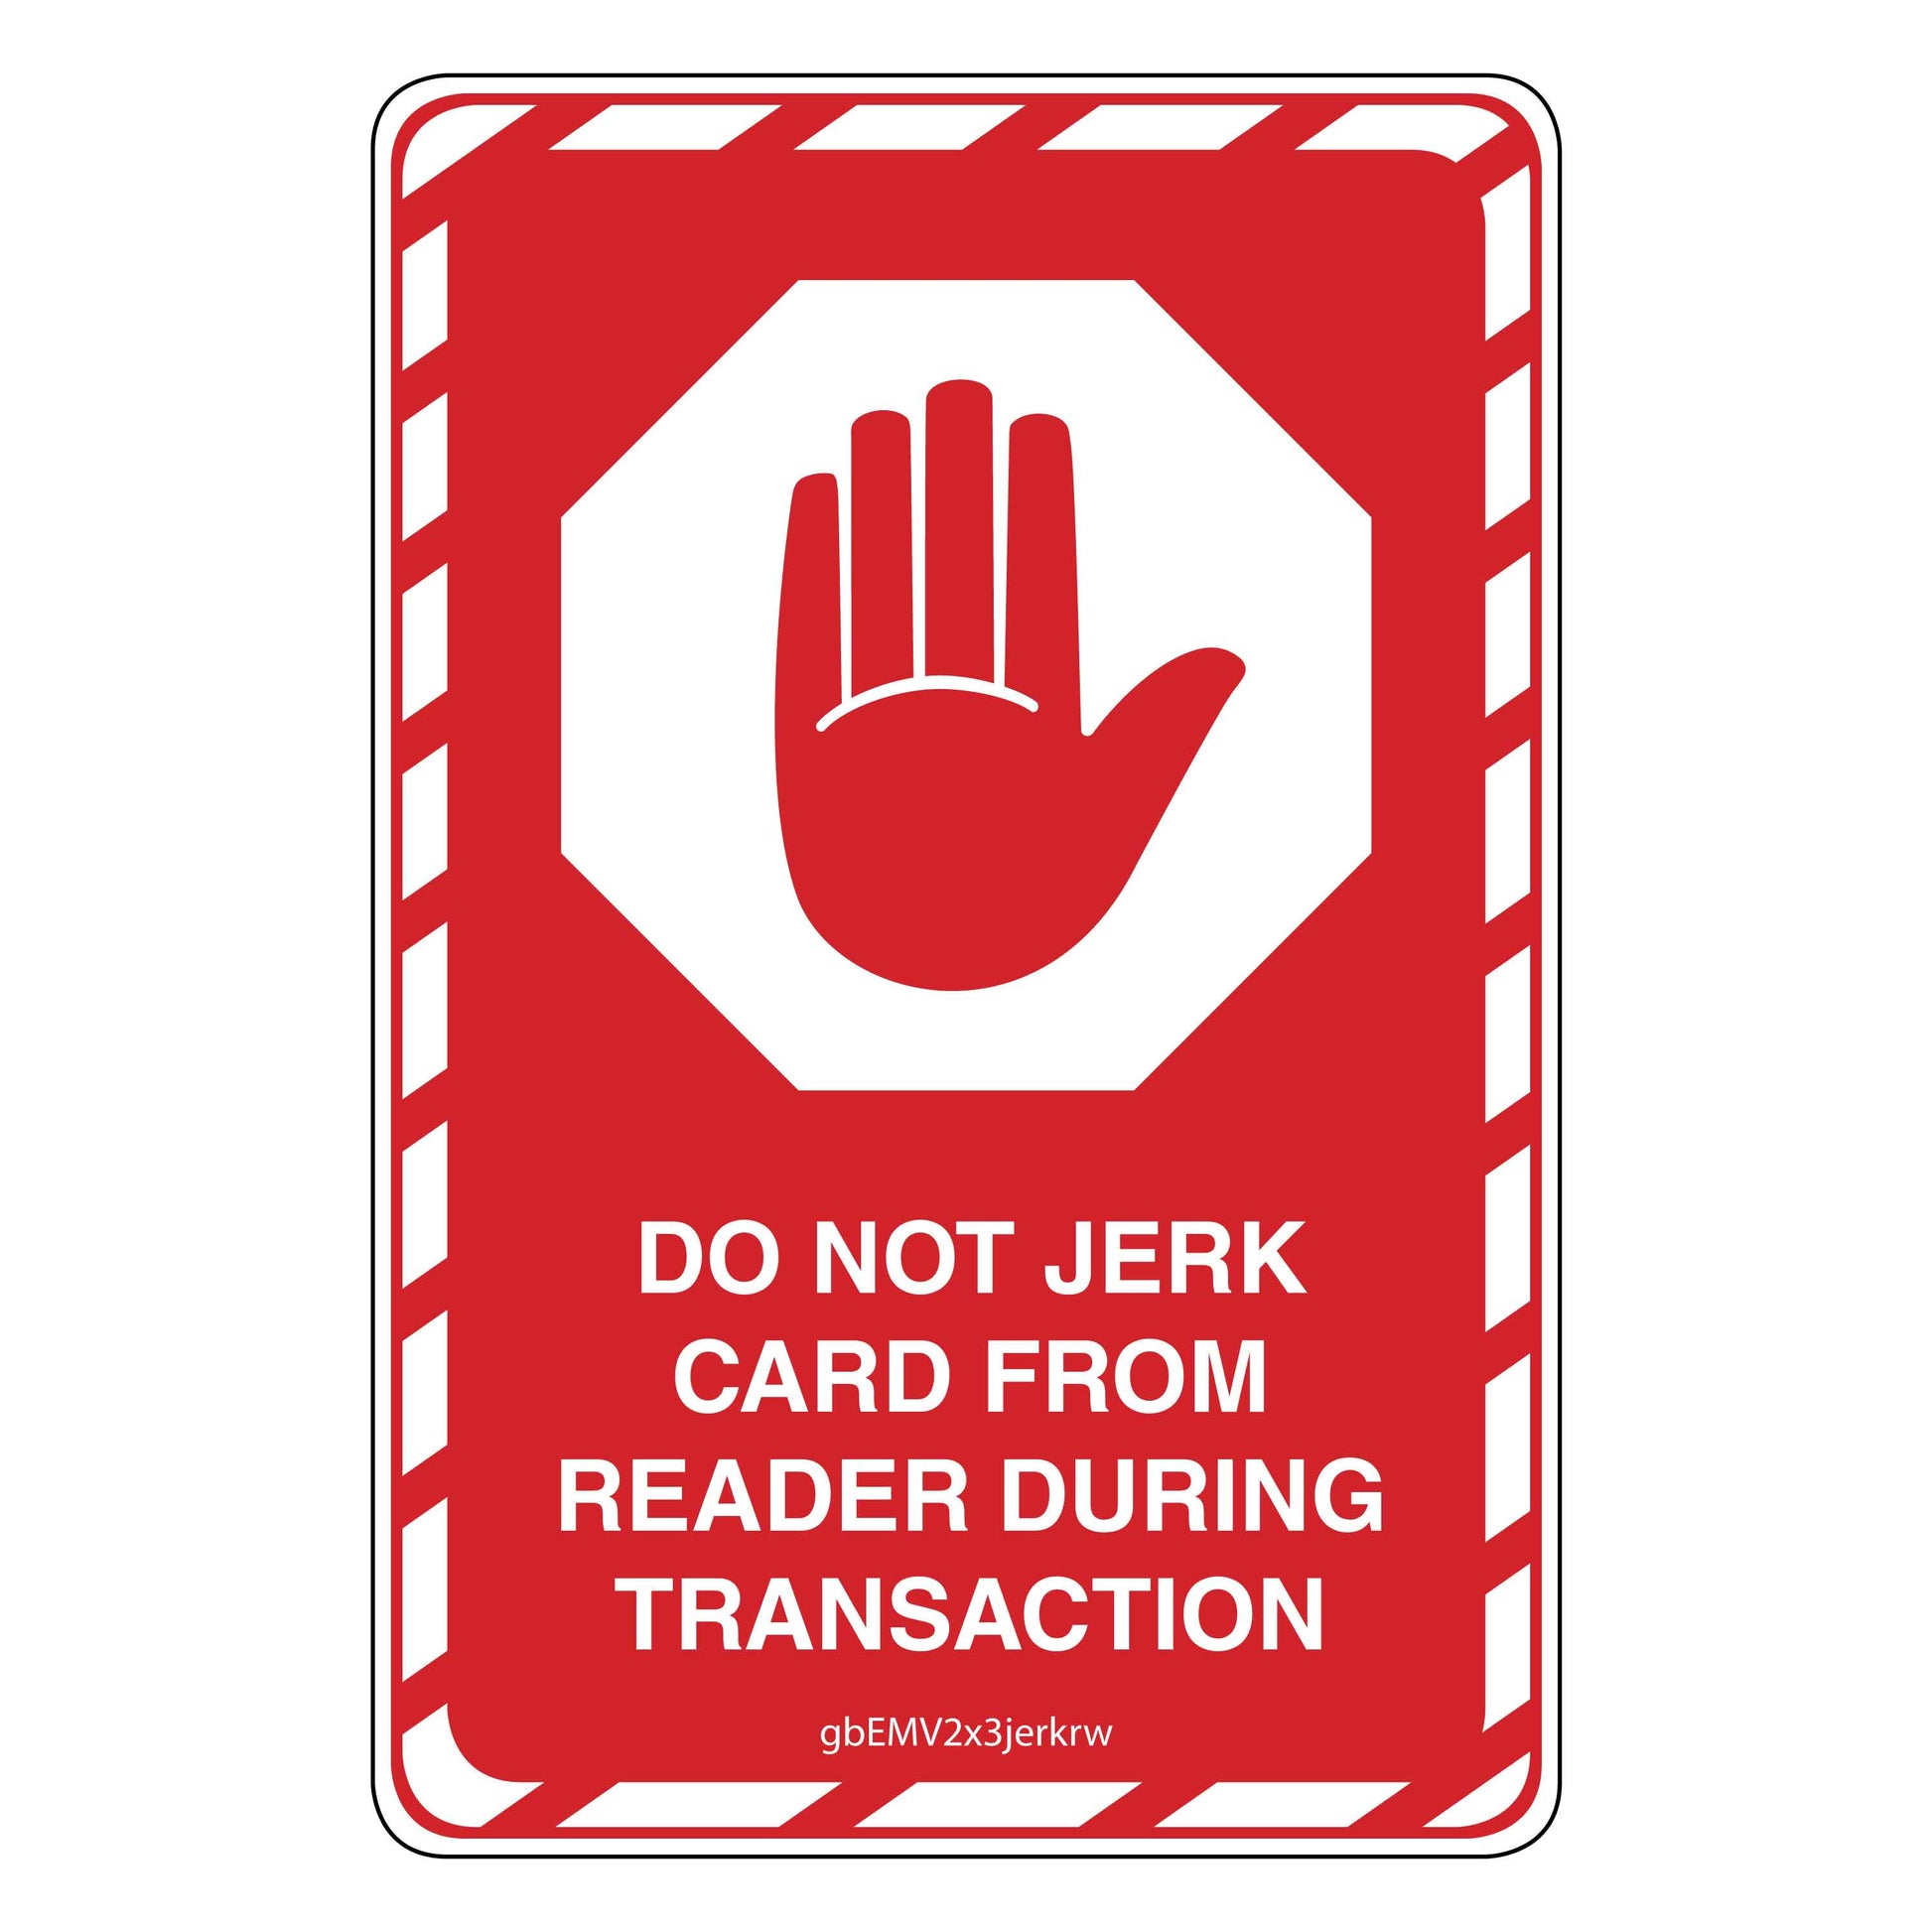 EMV Decal Red - Warning: Don't Jerk Card. 2 inches by 3 inches in size. 